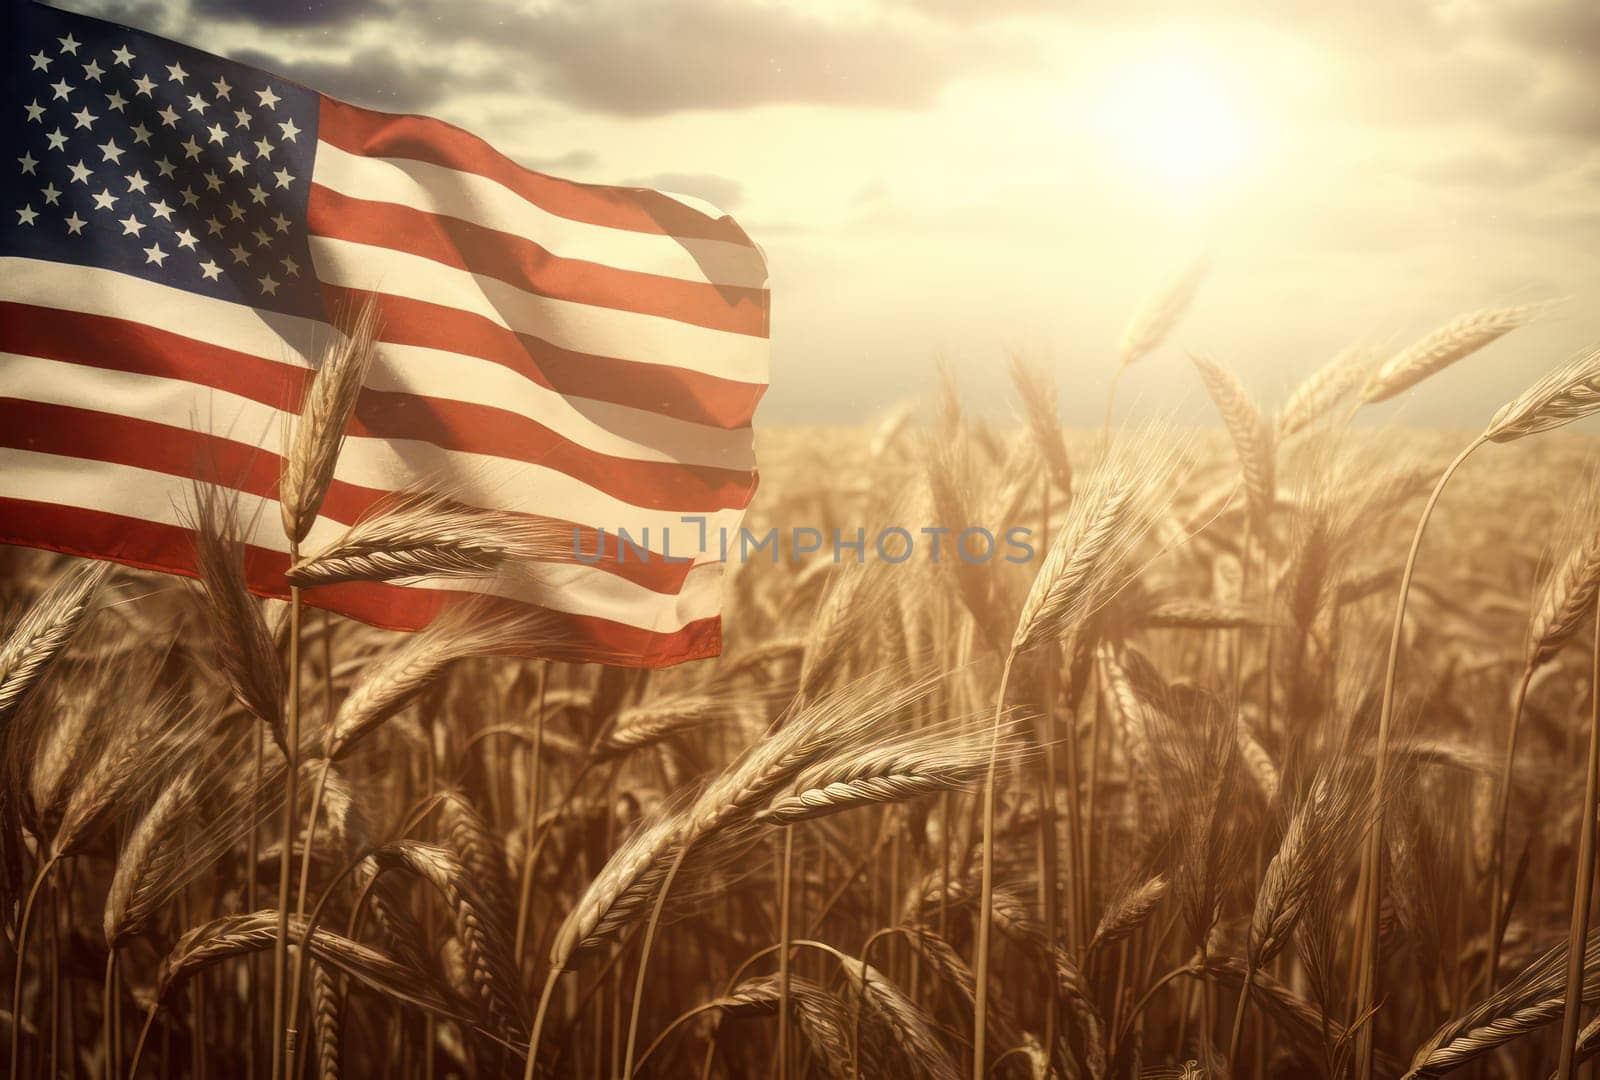 American Field of Patriotism: A Young Woman Holding the US Flag, Surrounded by Golden Wheat and Blue Sky by Vichizh